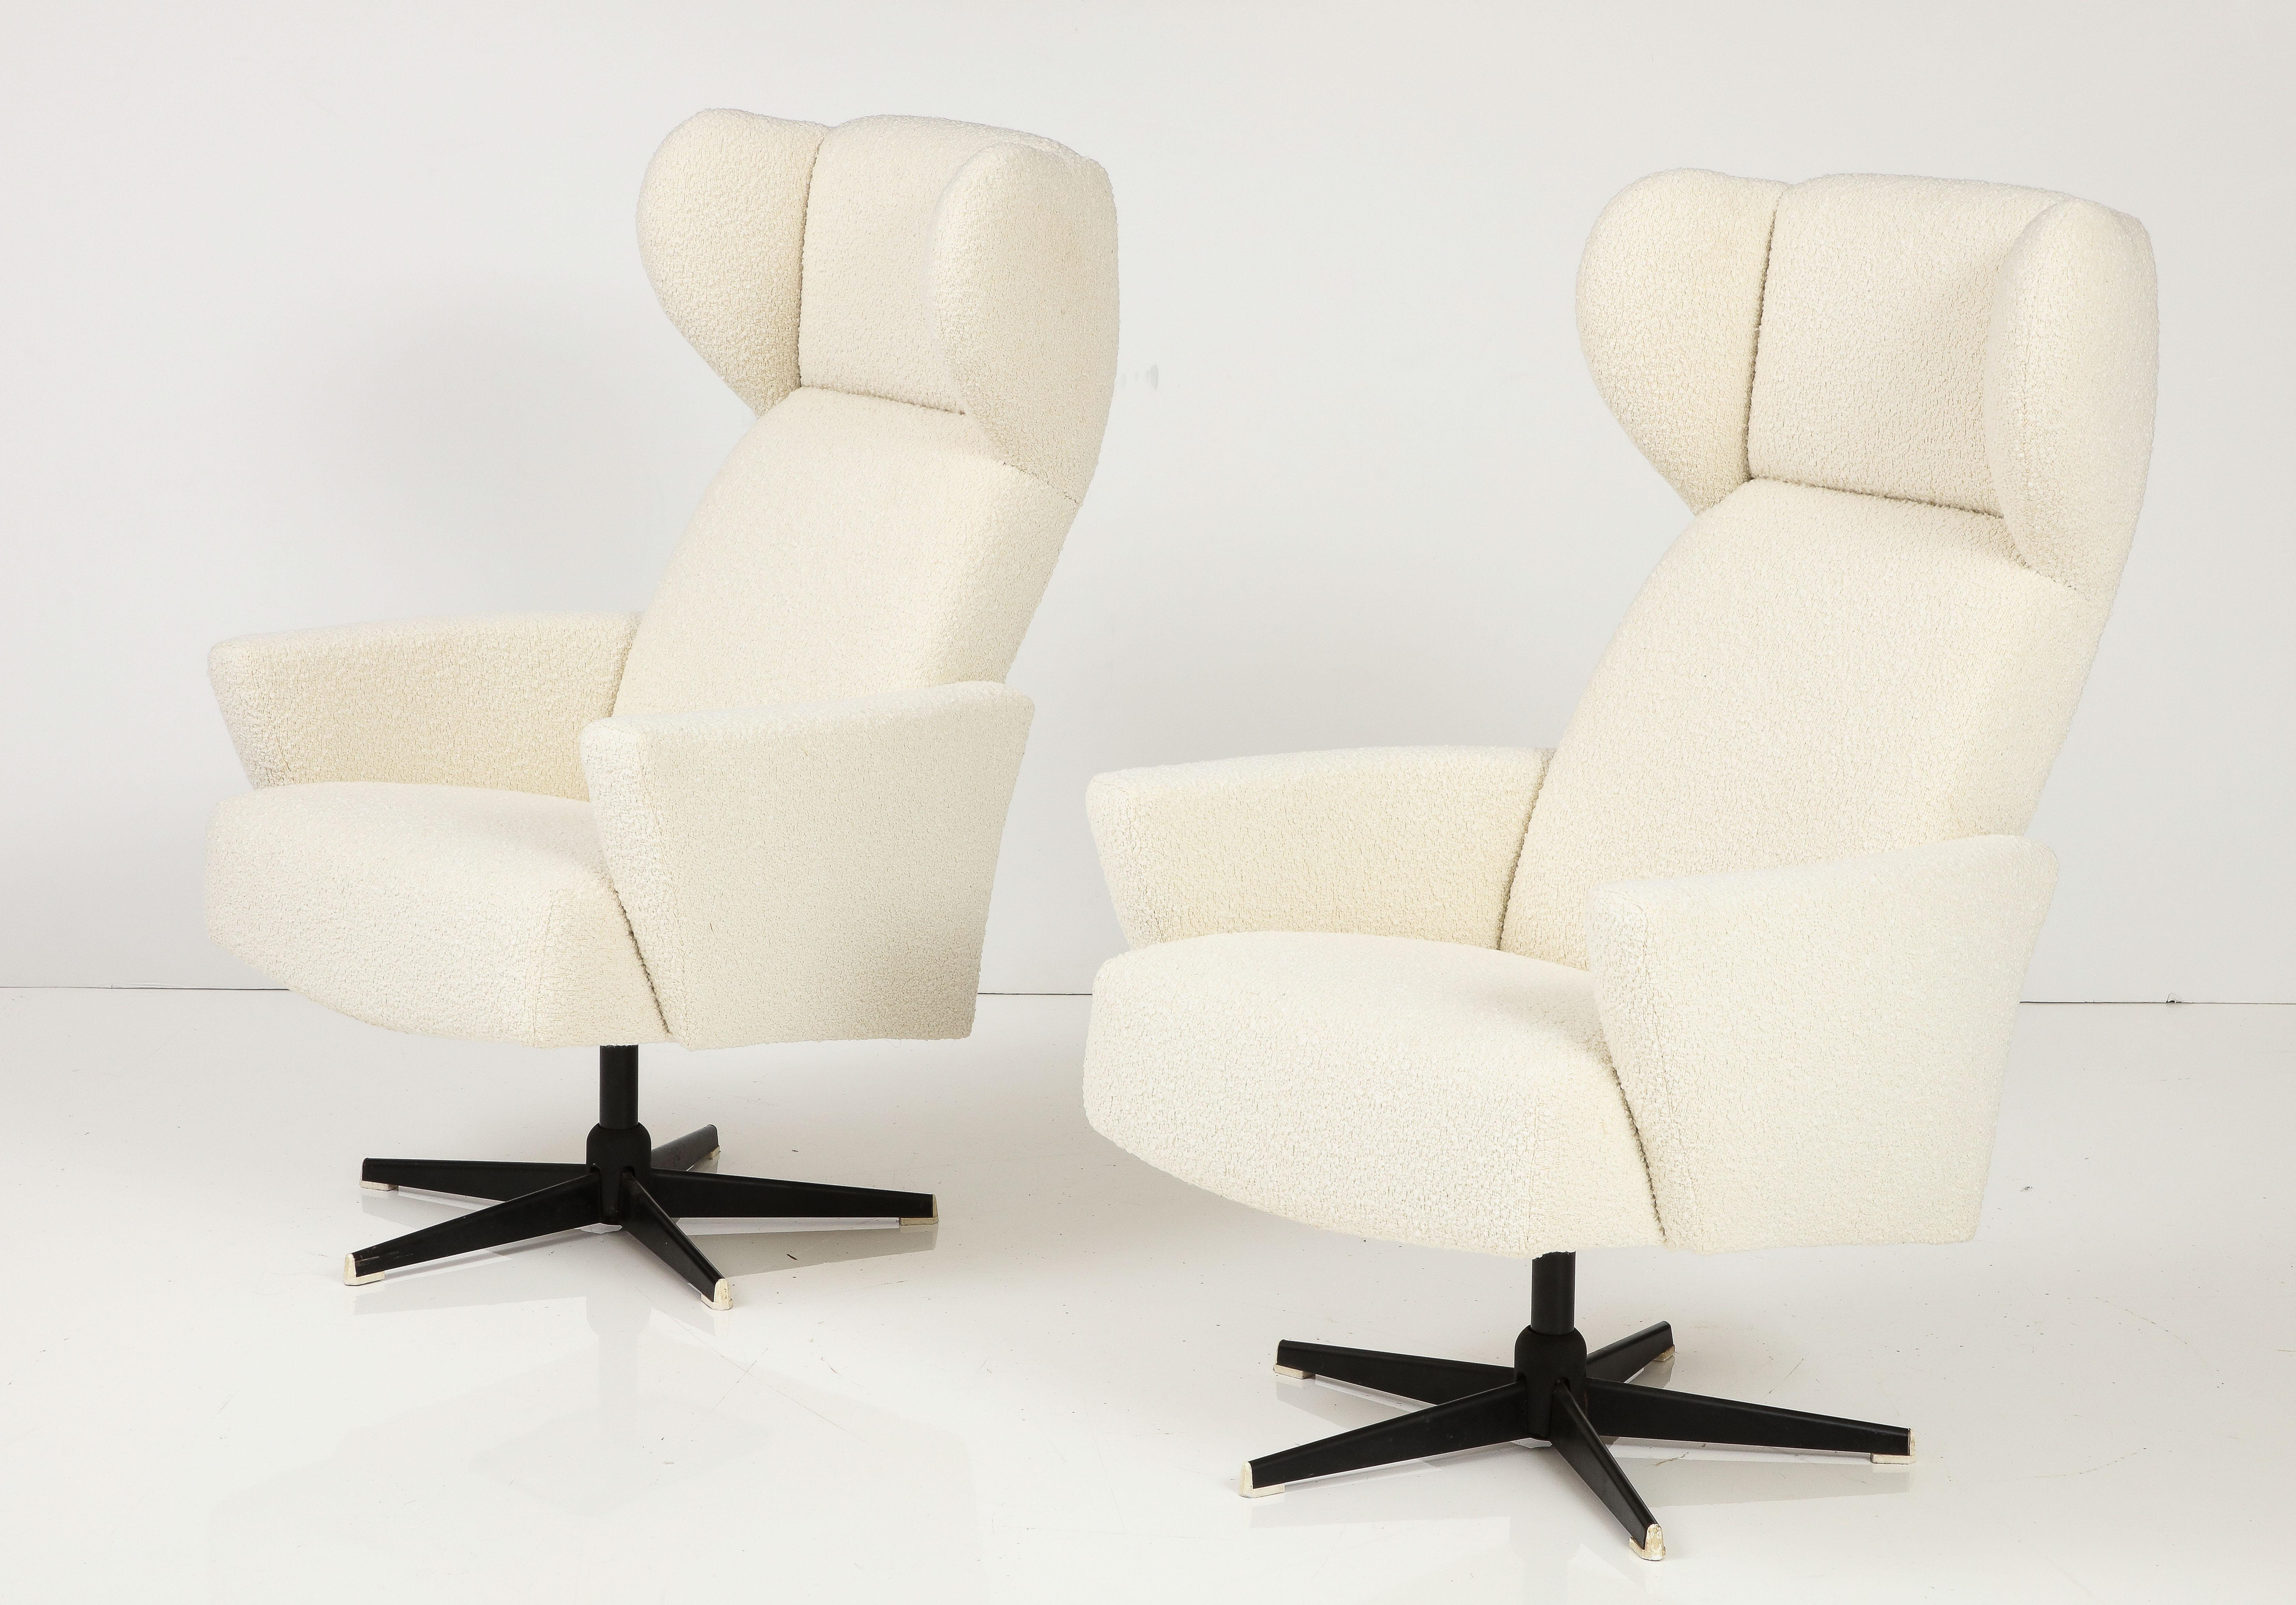 Pair of Italian Modernist High-Back Swivel Chairs, Italy, circa 1960 For Sale 5